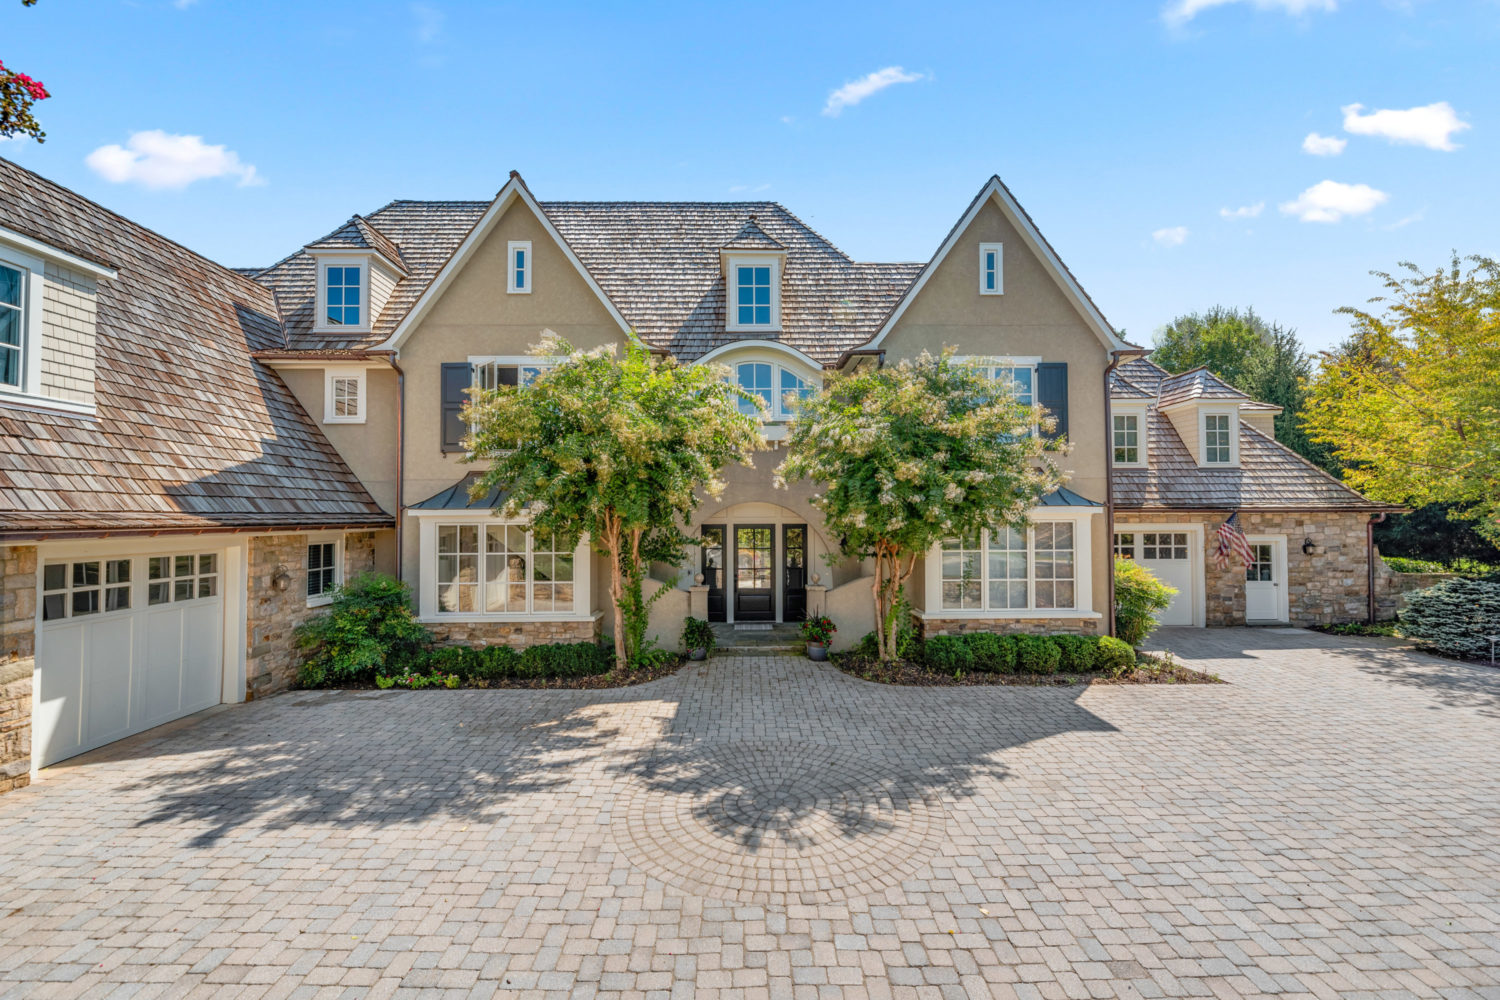 Check Out This Exceptional Modern English Country Masterpiece Situated on Two Acres in Potomac